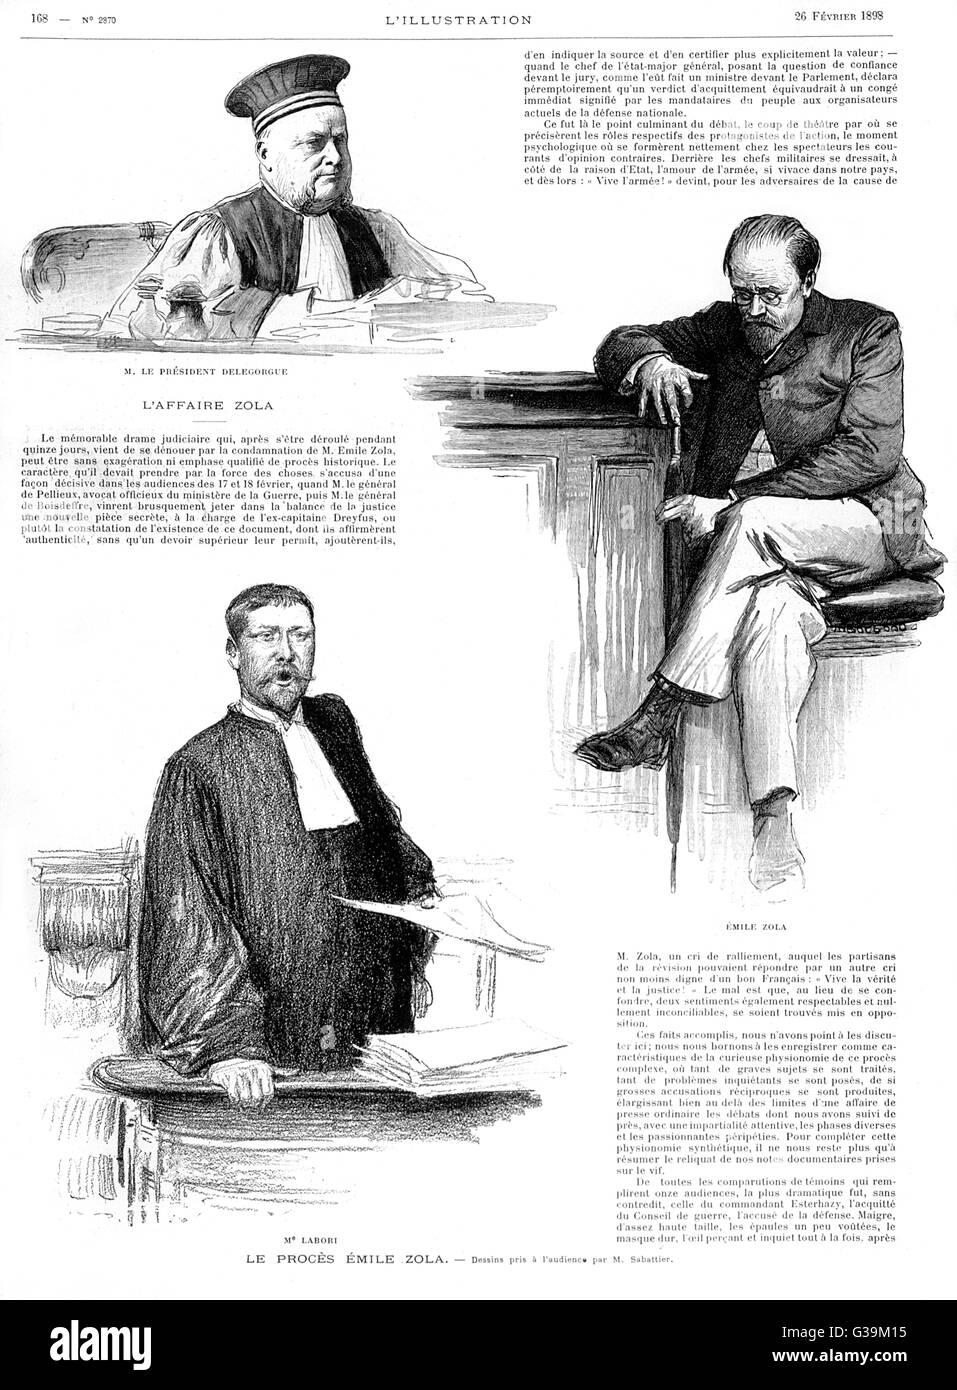 Emile Zola in court after the  publication of his  denunciation &quot;J'Accuse&quot; of the  army cover-up.       Date: 26 February 1898 Stock Photo